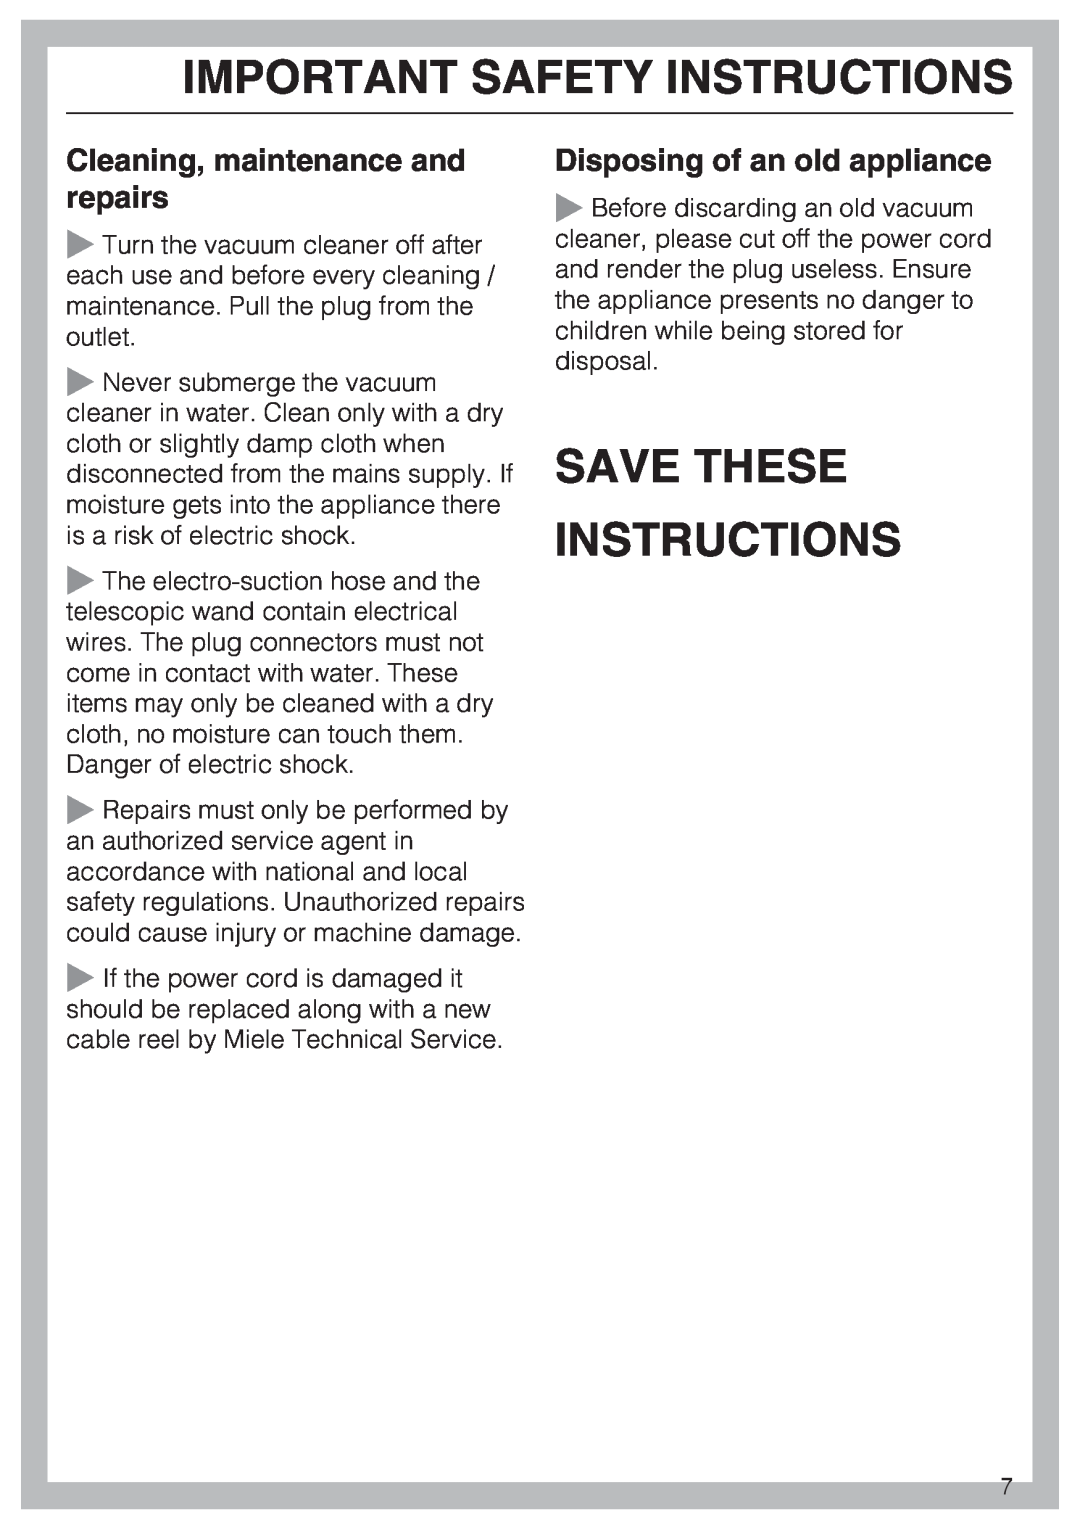 Miele S5981 Save These Instructions, Cleaning, maintenance and repairs, Disposing of an old appliance 